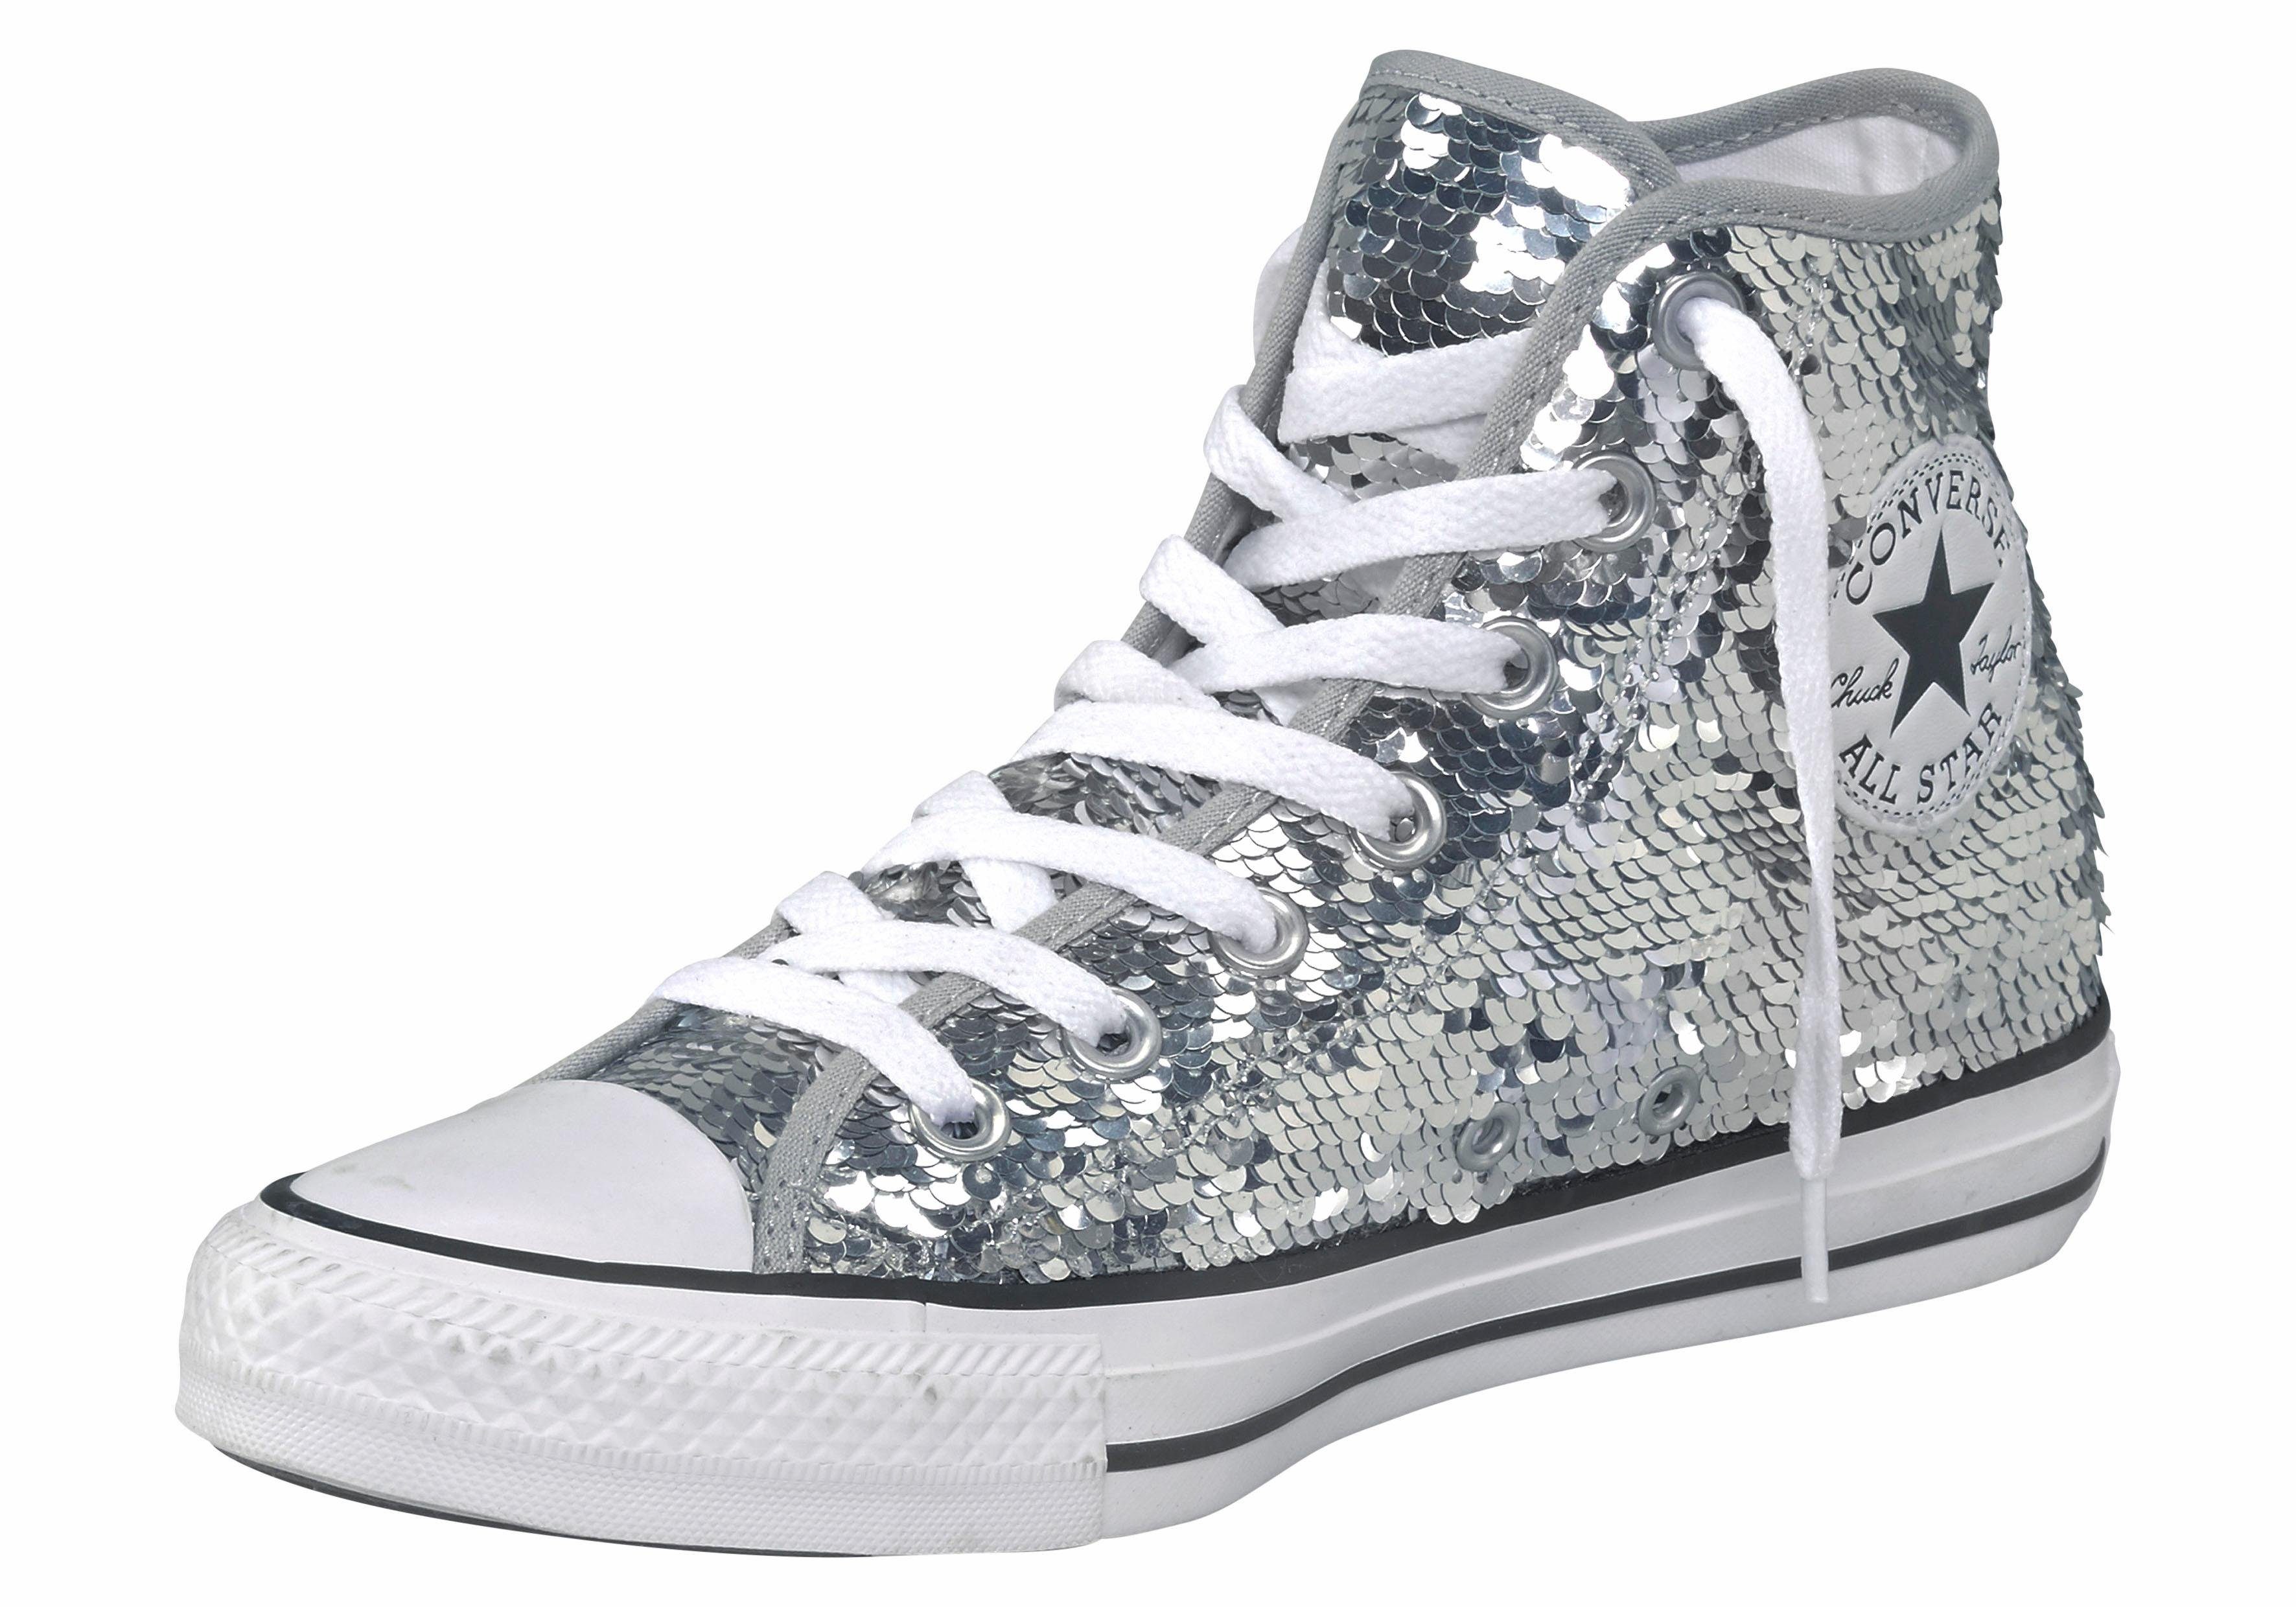 Otto - Converse NU 15% KORTING: Converse sneakers Chuck Taylor All Star Sequins